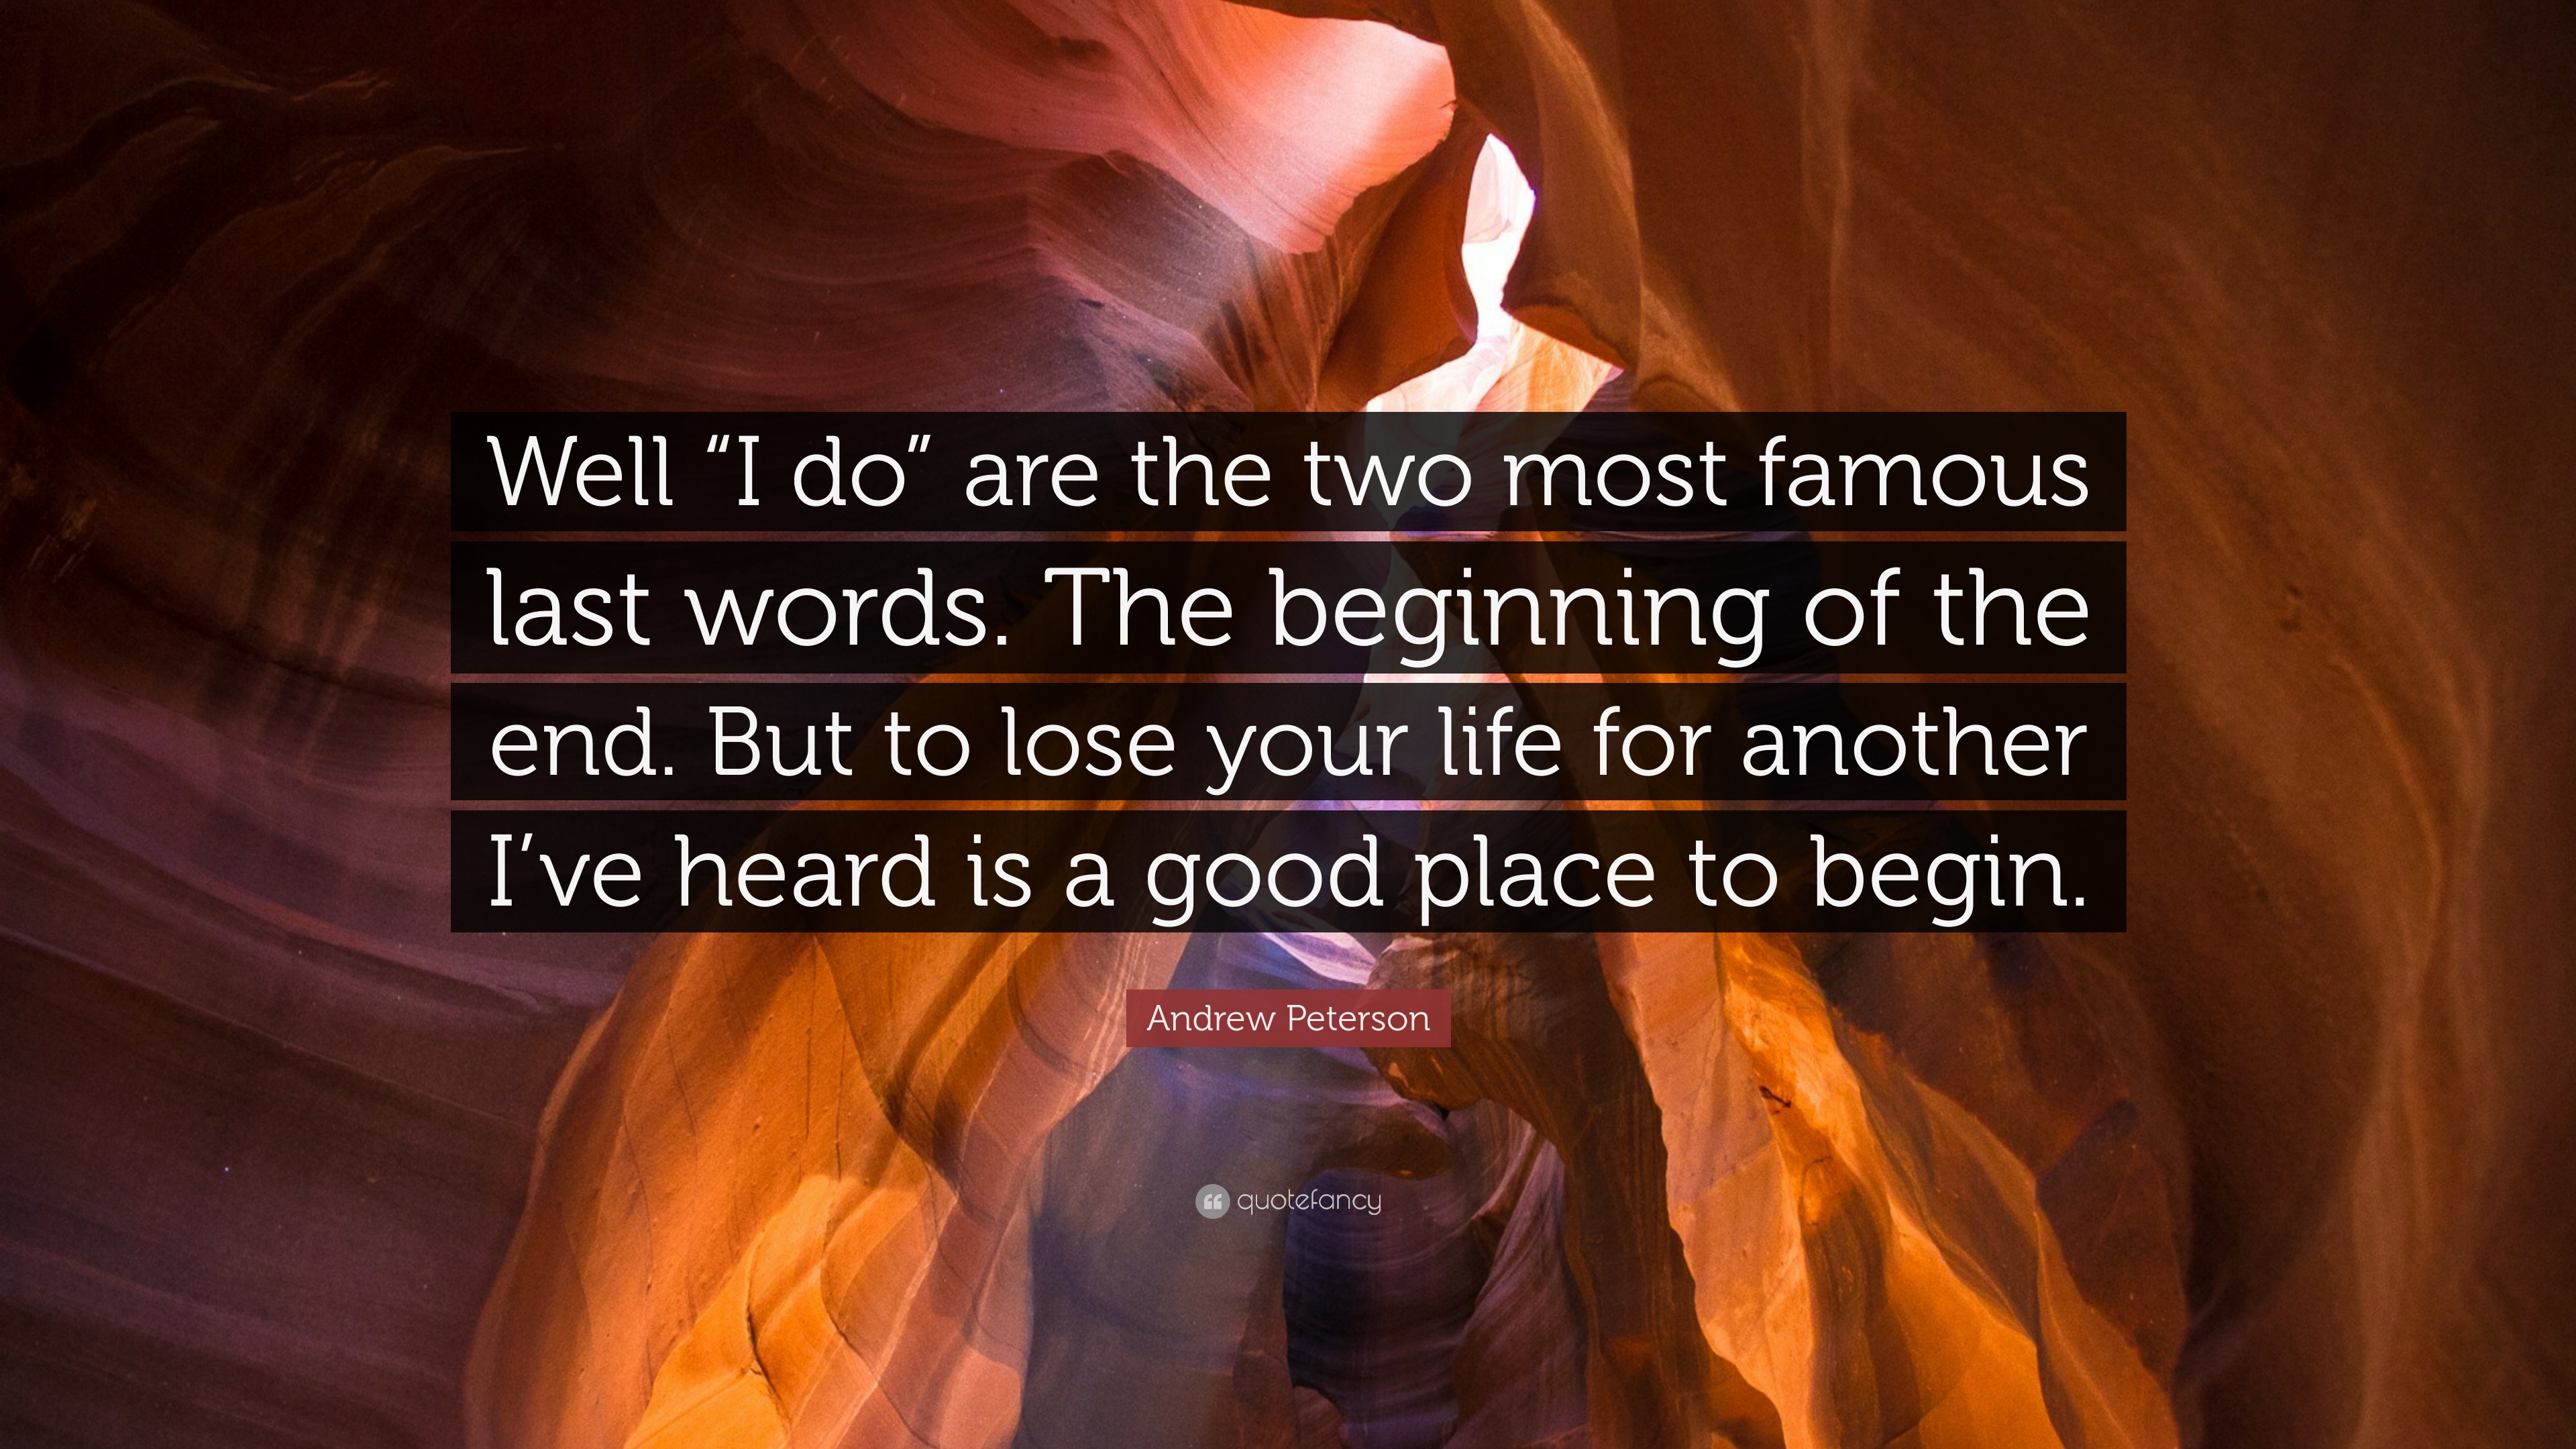 Andrew Peterson Quote: "Well "I do" are the two most famous ...